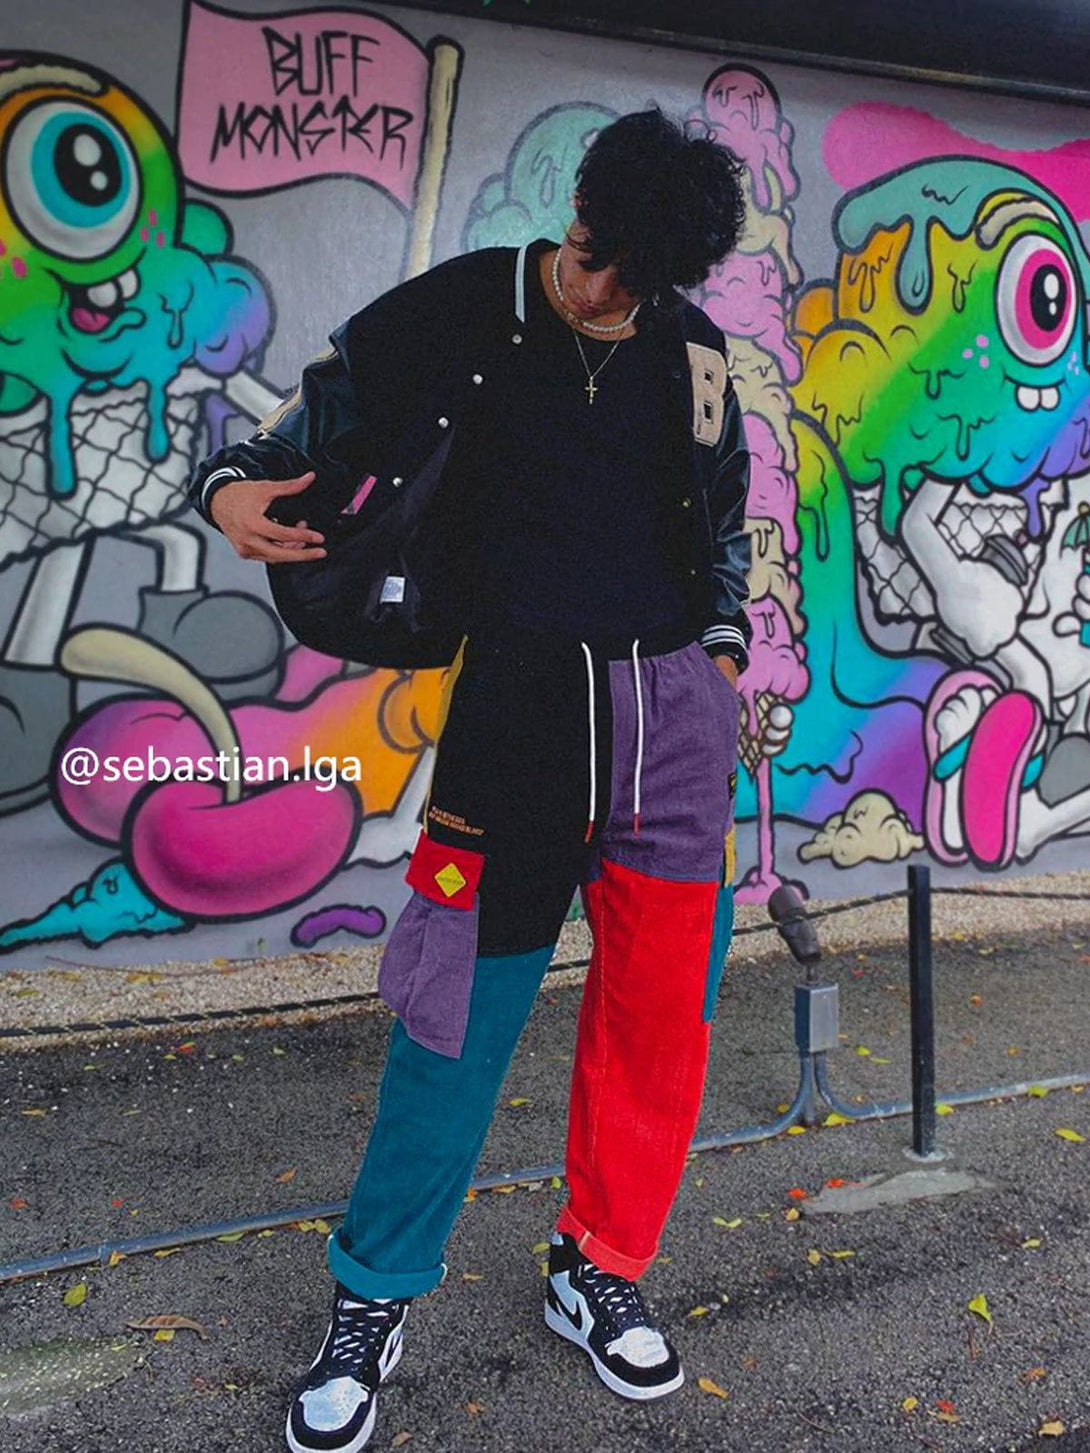 Levefly - "Back to 90's" Patchwork Color Block Corduroy Pants - Streetwear Fashion - levefly.com